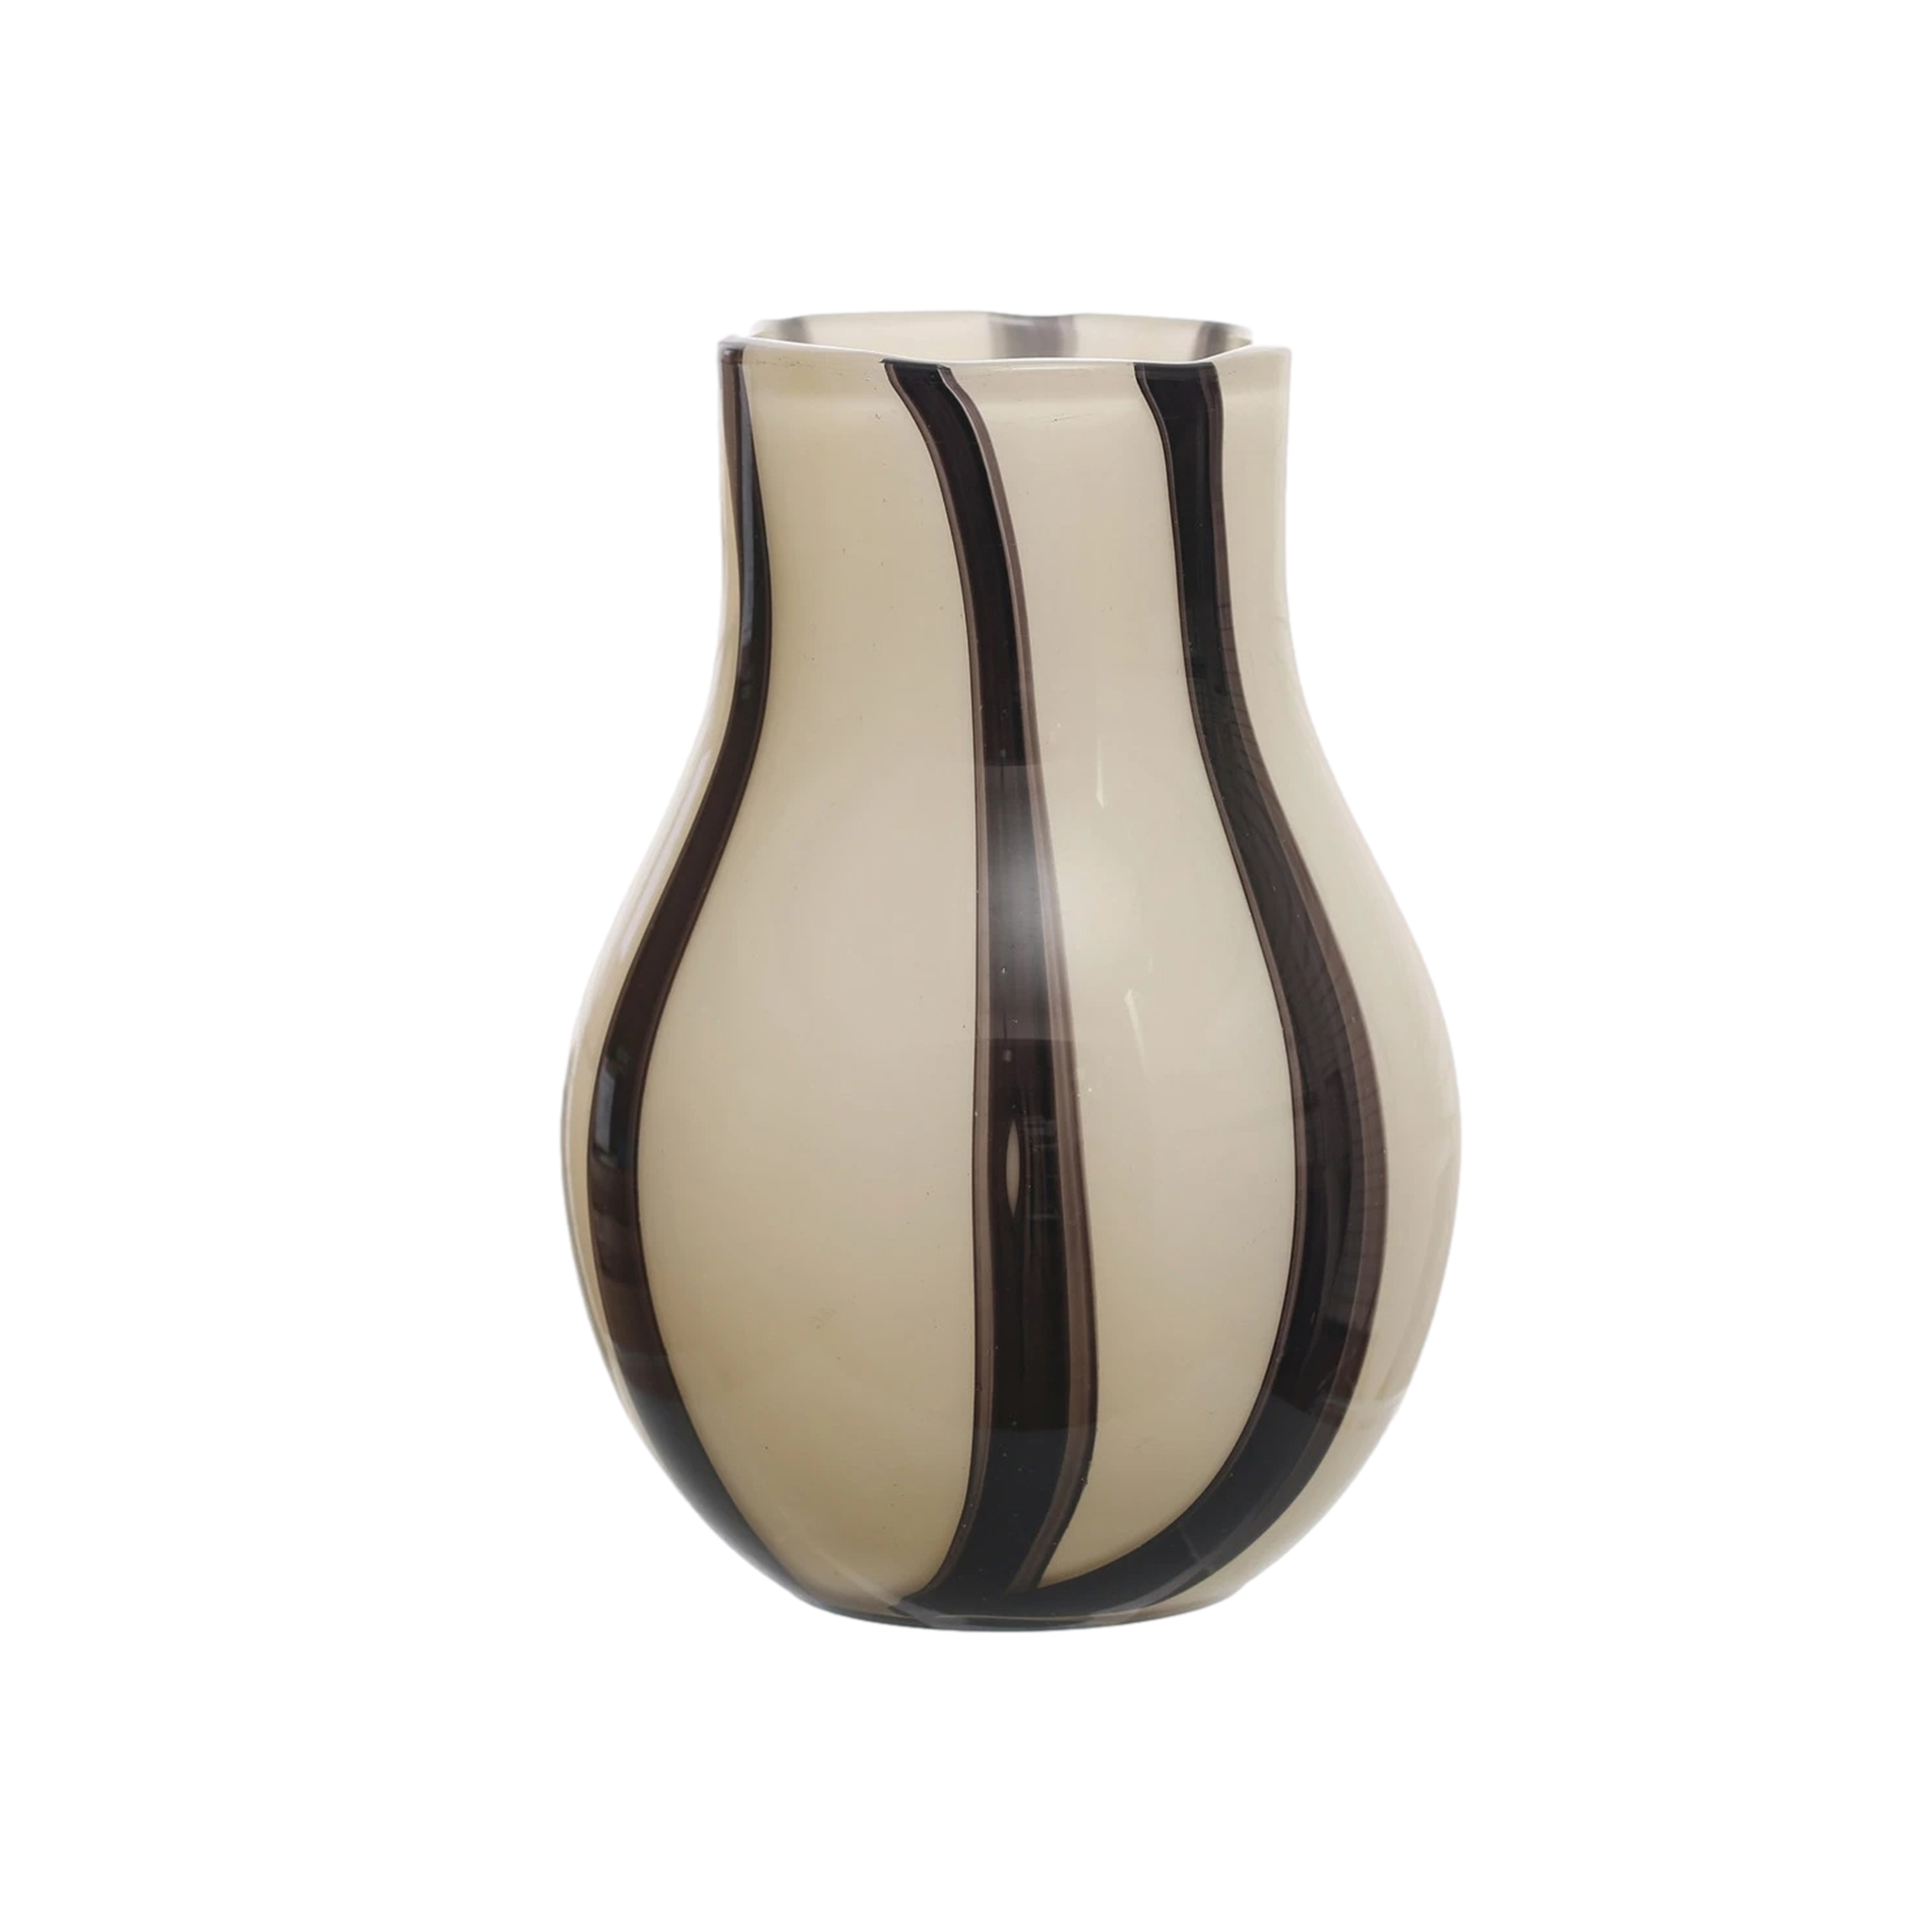 Glass Vase with Black and White Stripes